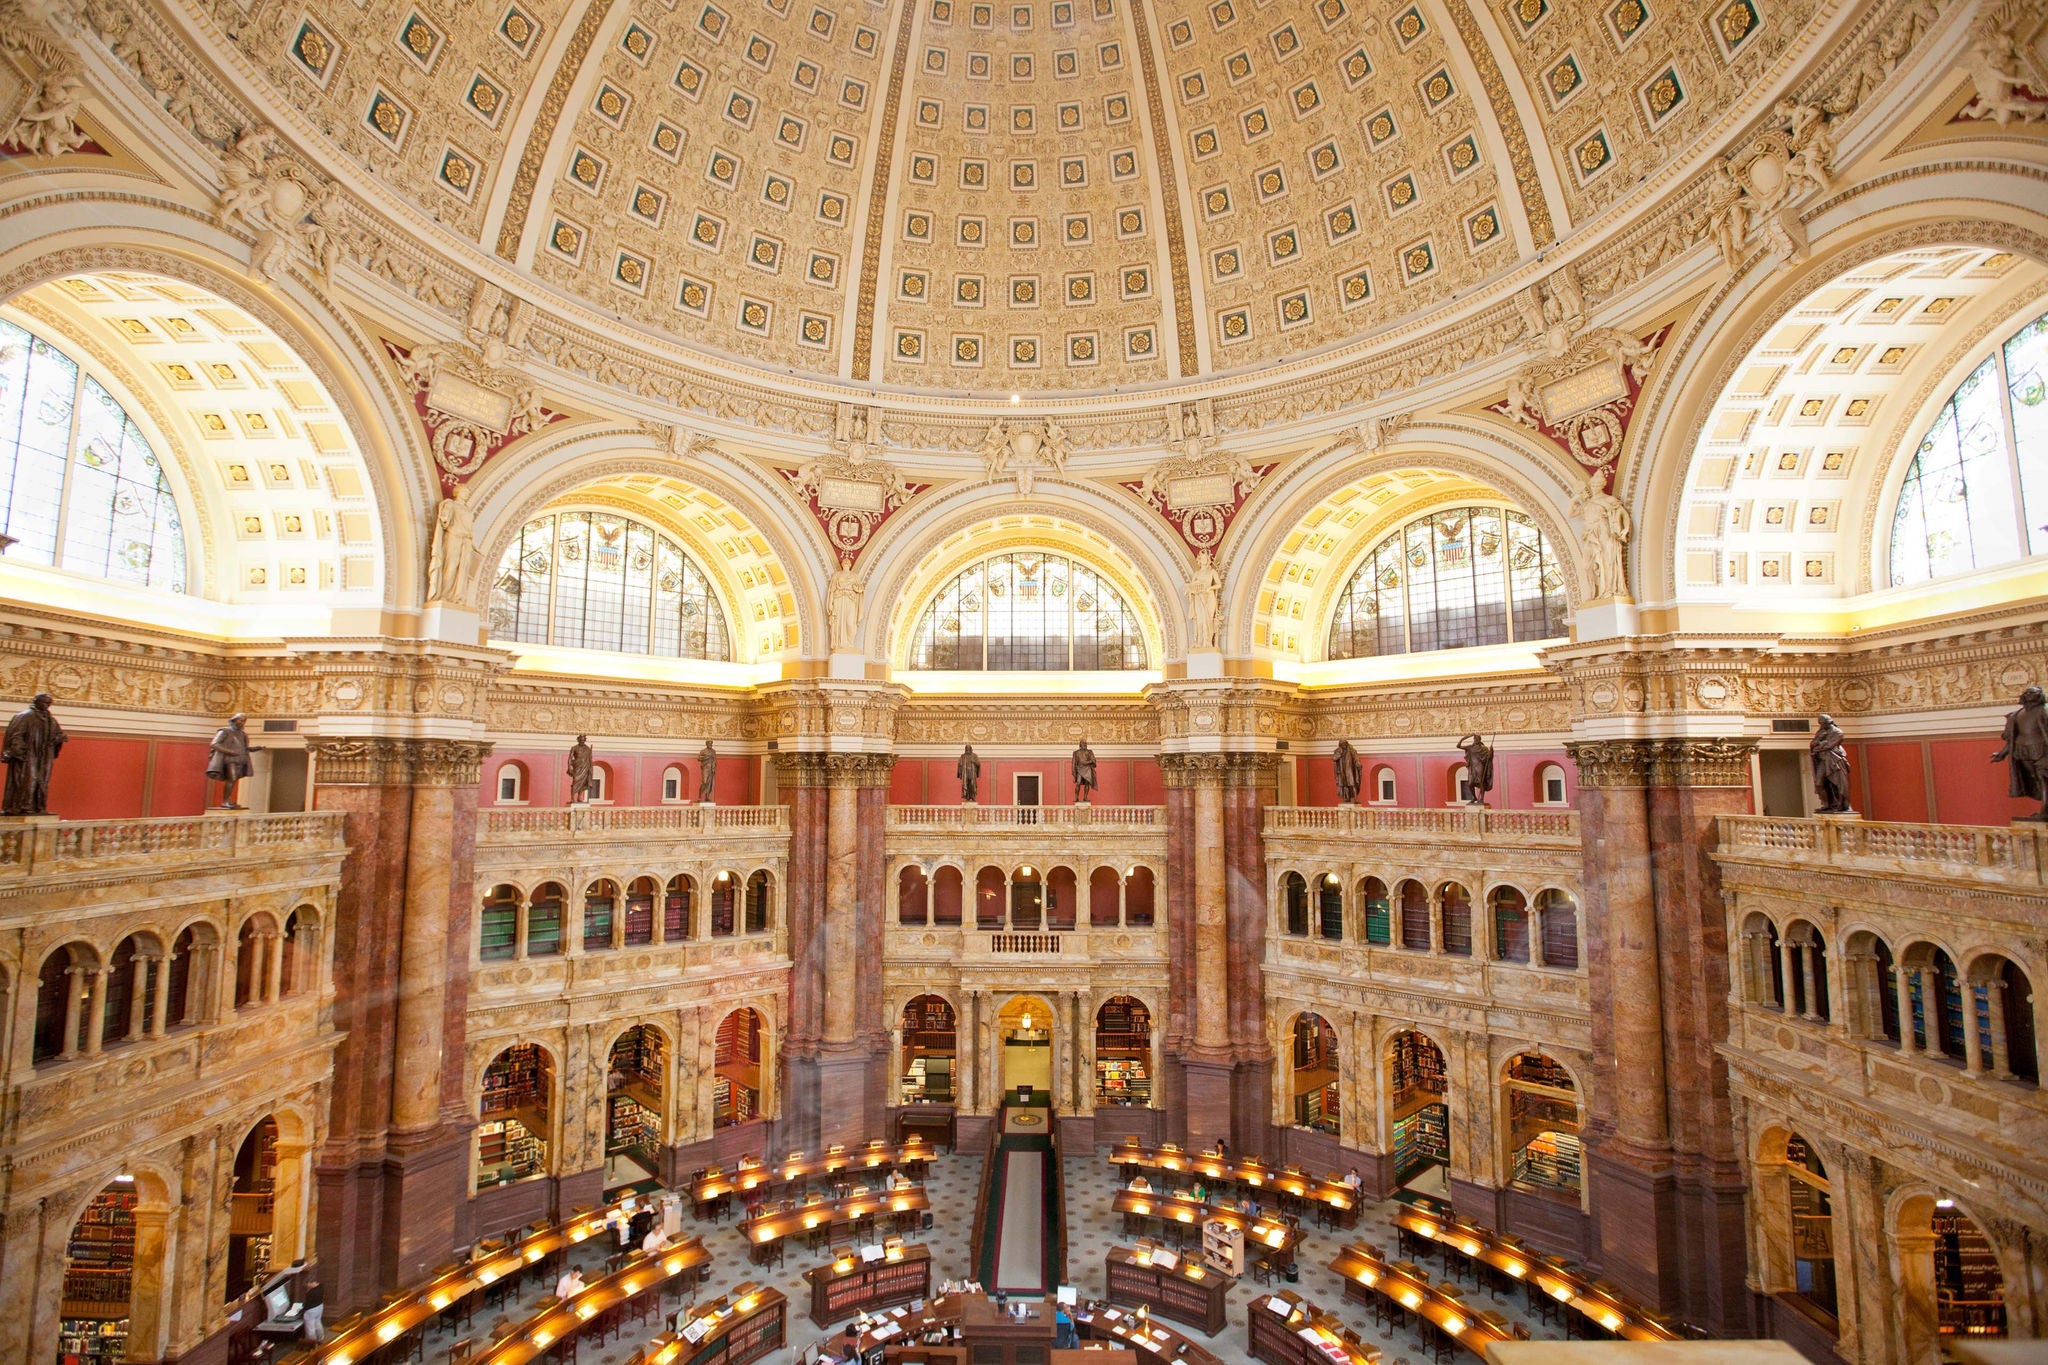 The library of congress building in washington dc